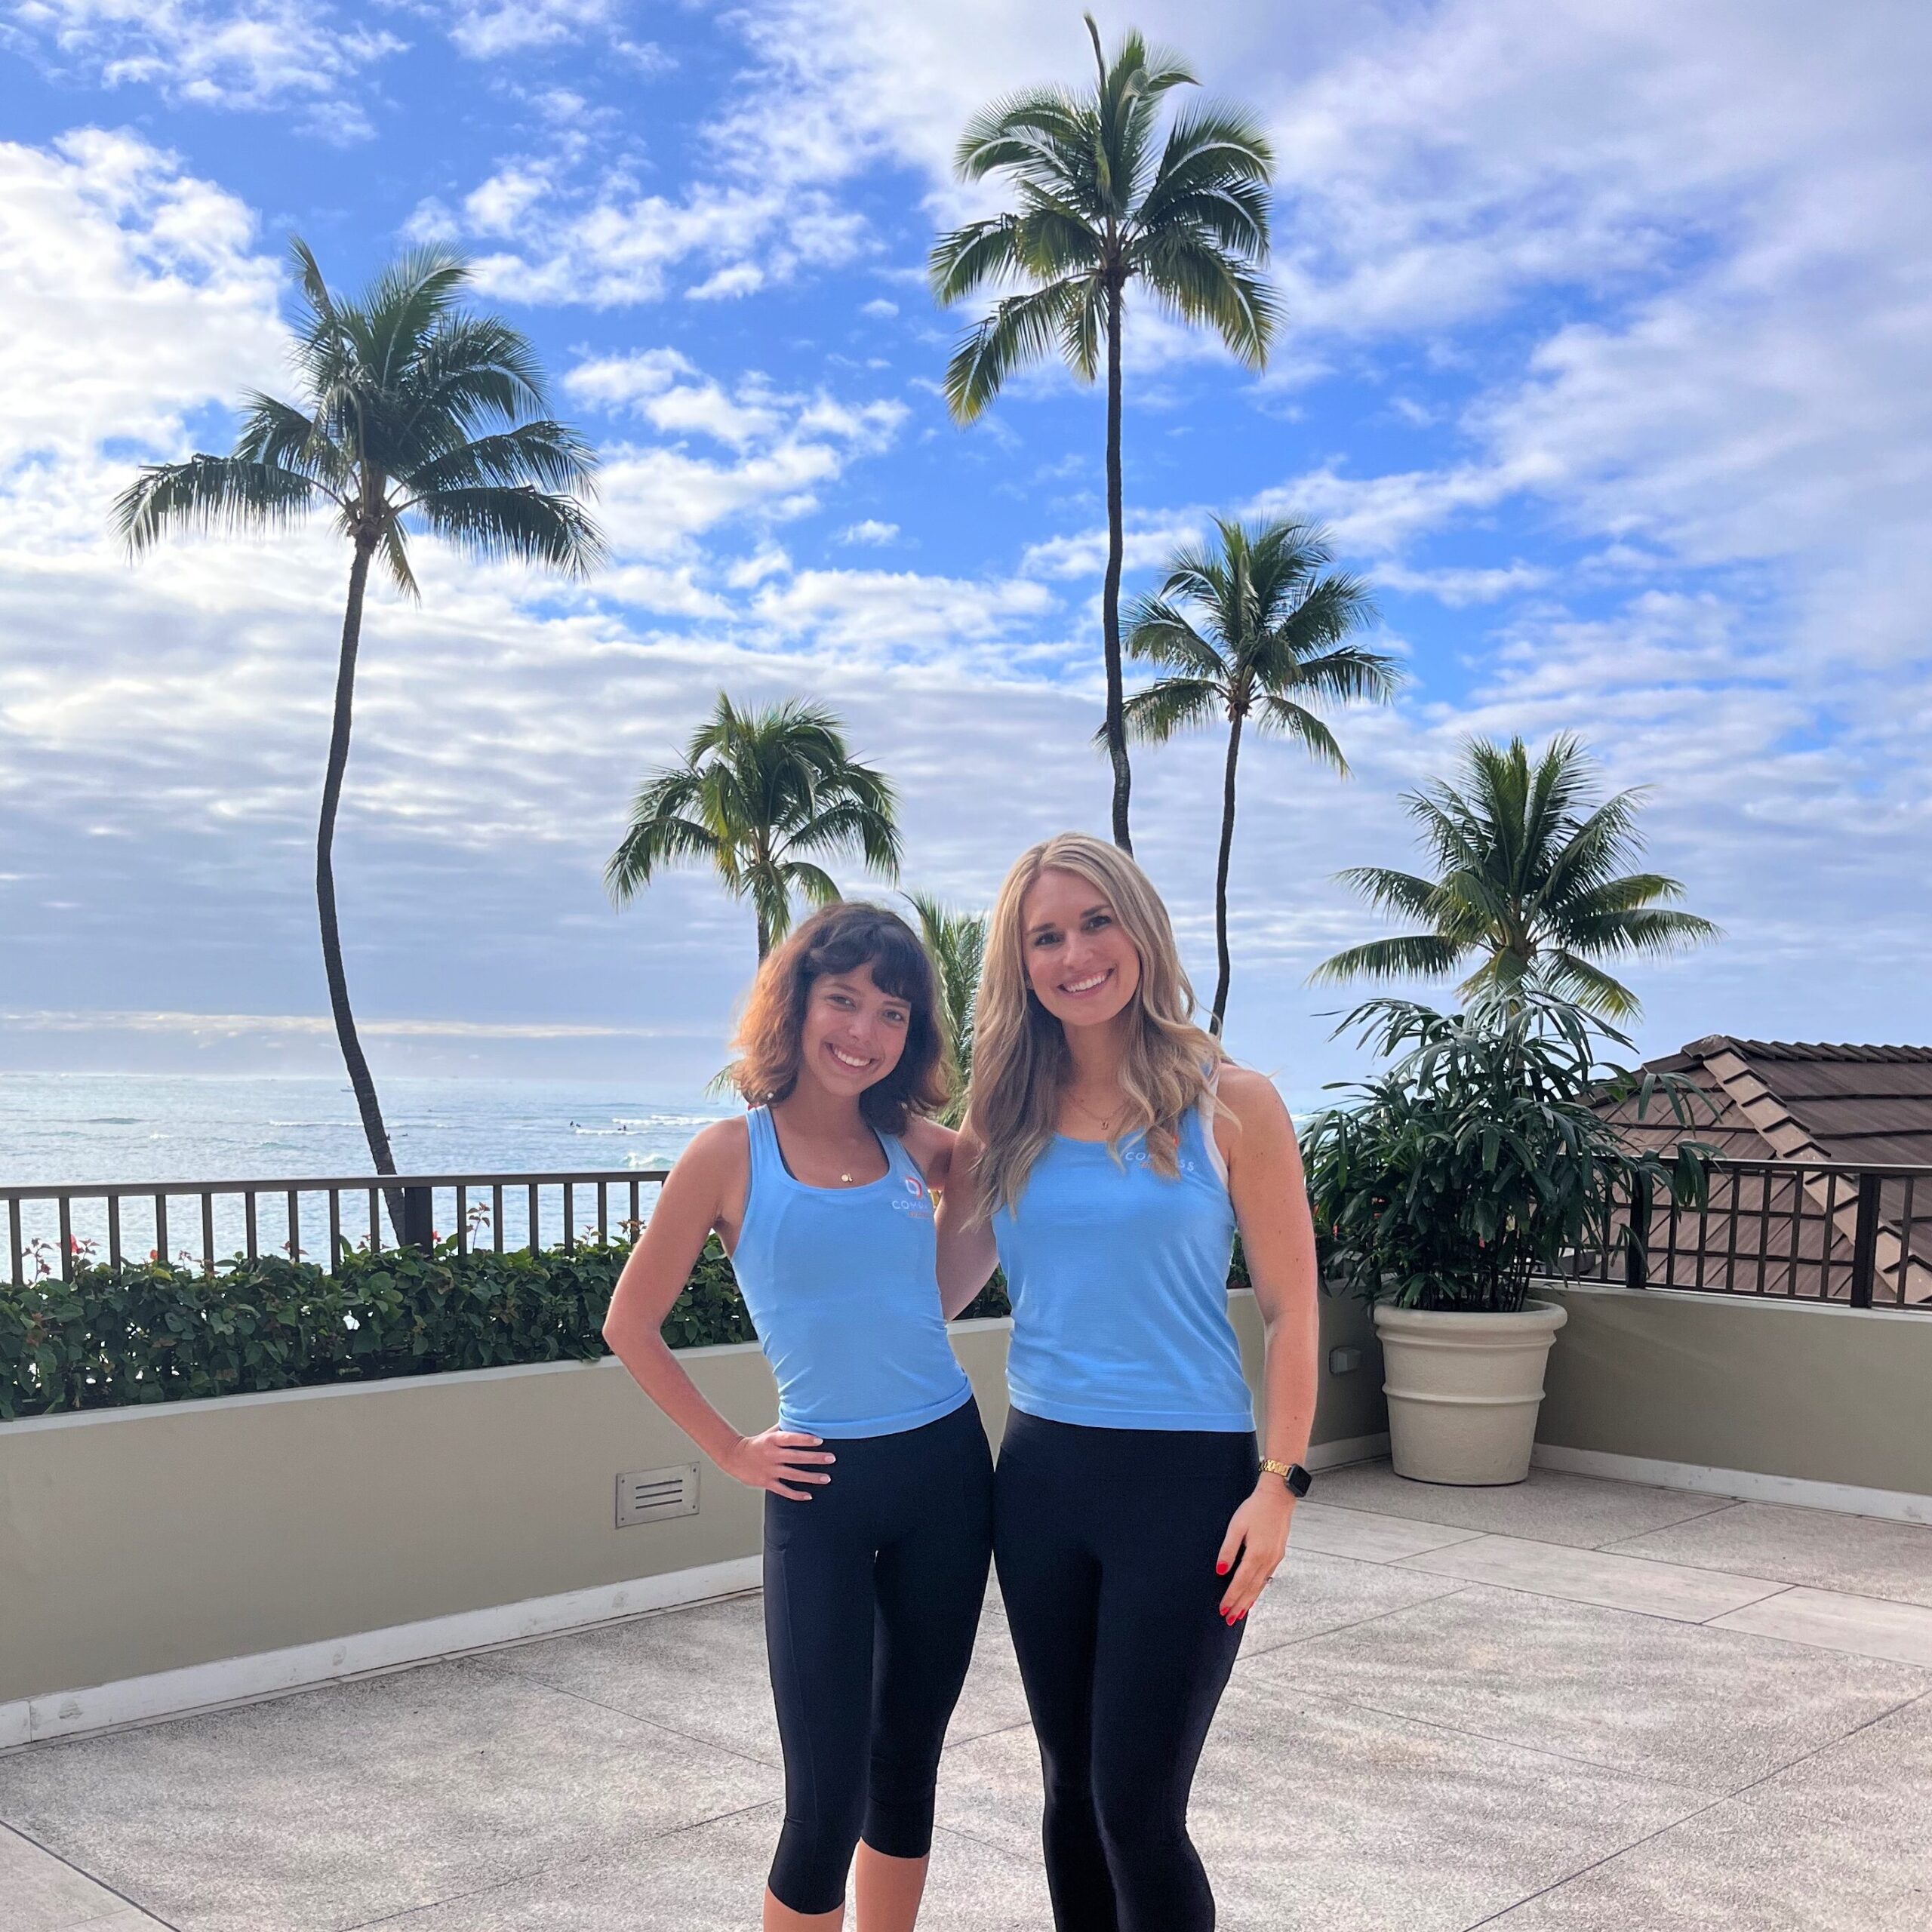 Allyship in Tech: How to Support Women in the Workplace featured image: Chelsey Cooper and Frances Verdugo Lash smiling in matching blue tops and black pants on a sunny terrace with palm trees and the ocean in the background.